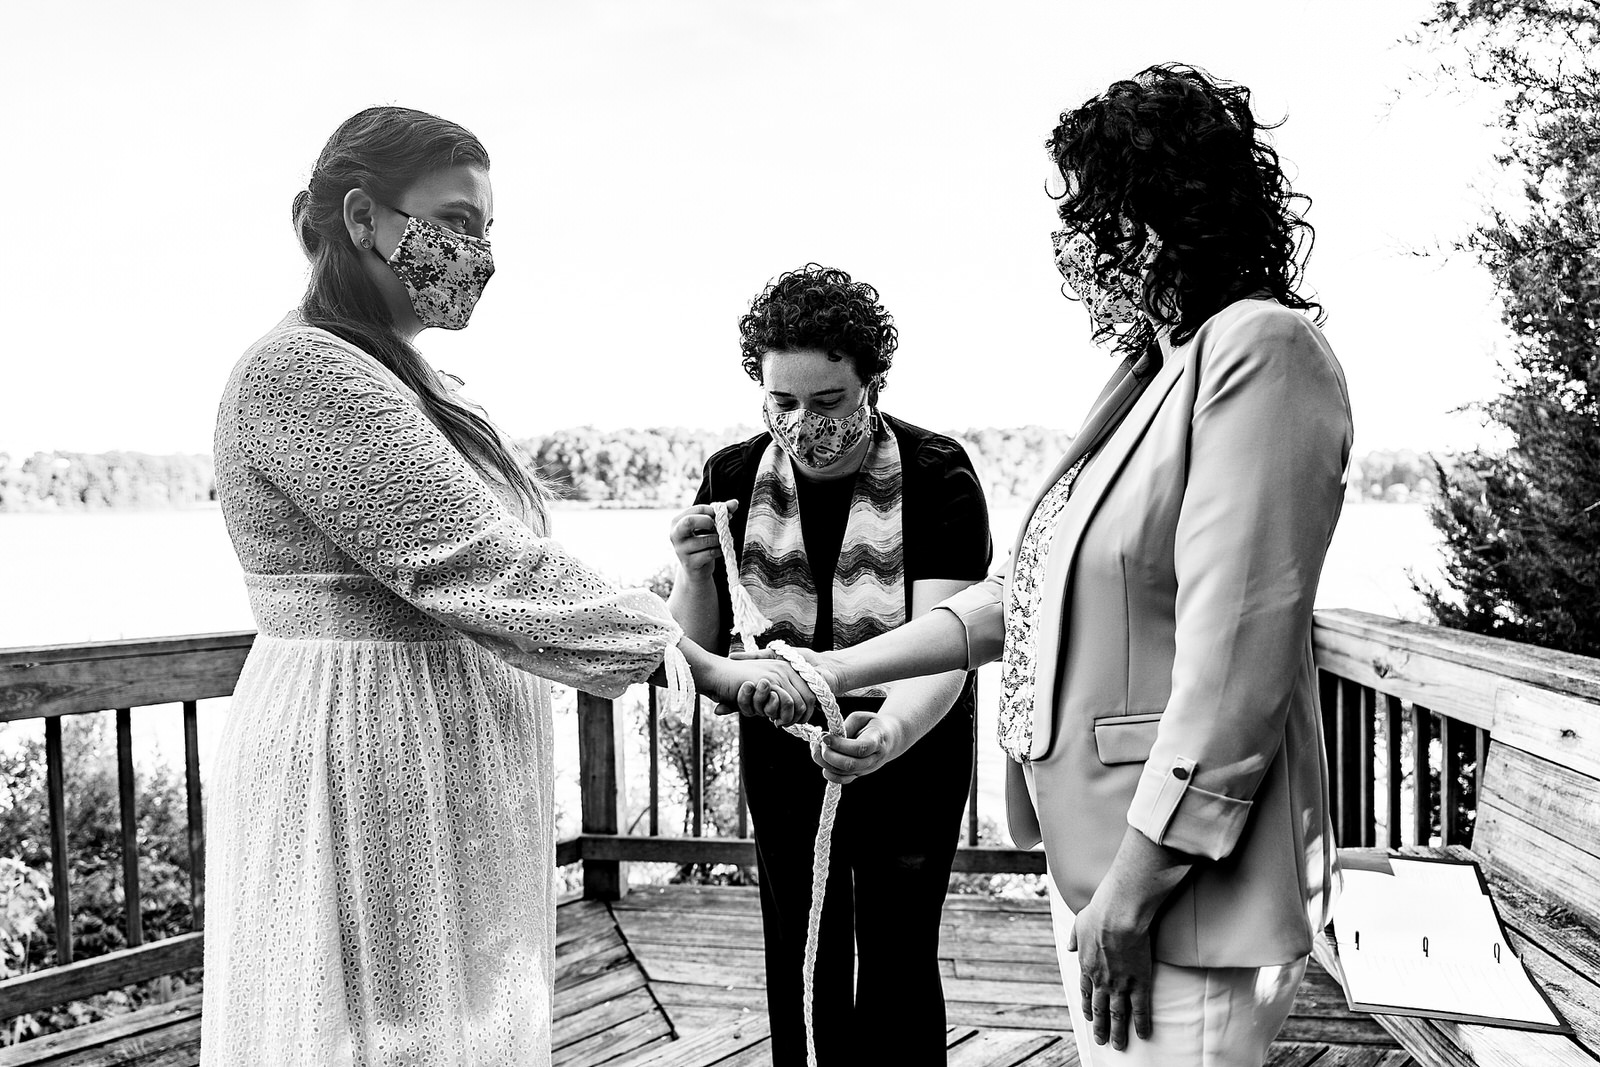 Magical Weddings by Carly performs a hand-fasting ceremony for two brides during their same-sex elopement in Raleigh, NC